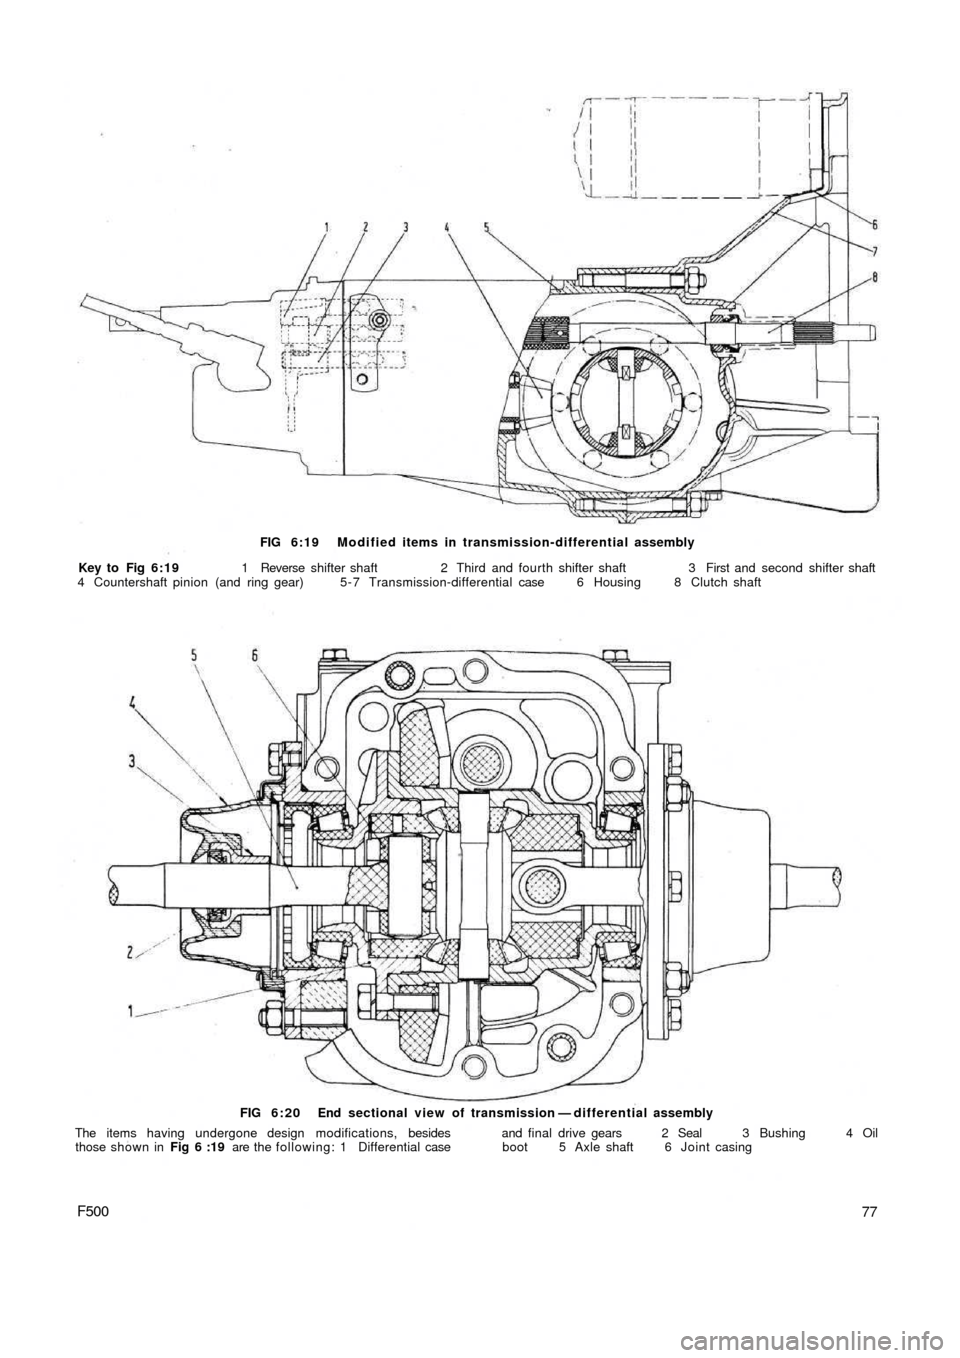 FIAT 500 1970 1.G User Guide FIG 6:19 Modified items in transmission-differential assembly
Key to  Fig  6:19 1 Reverse shifter shaft  2 Third and fourth shifter shaft  3 First and second shifter shaft
4 Countershaft pinion (and r